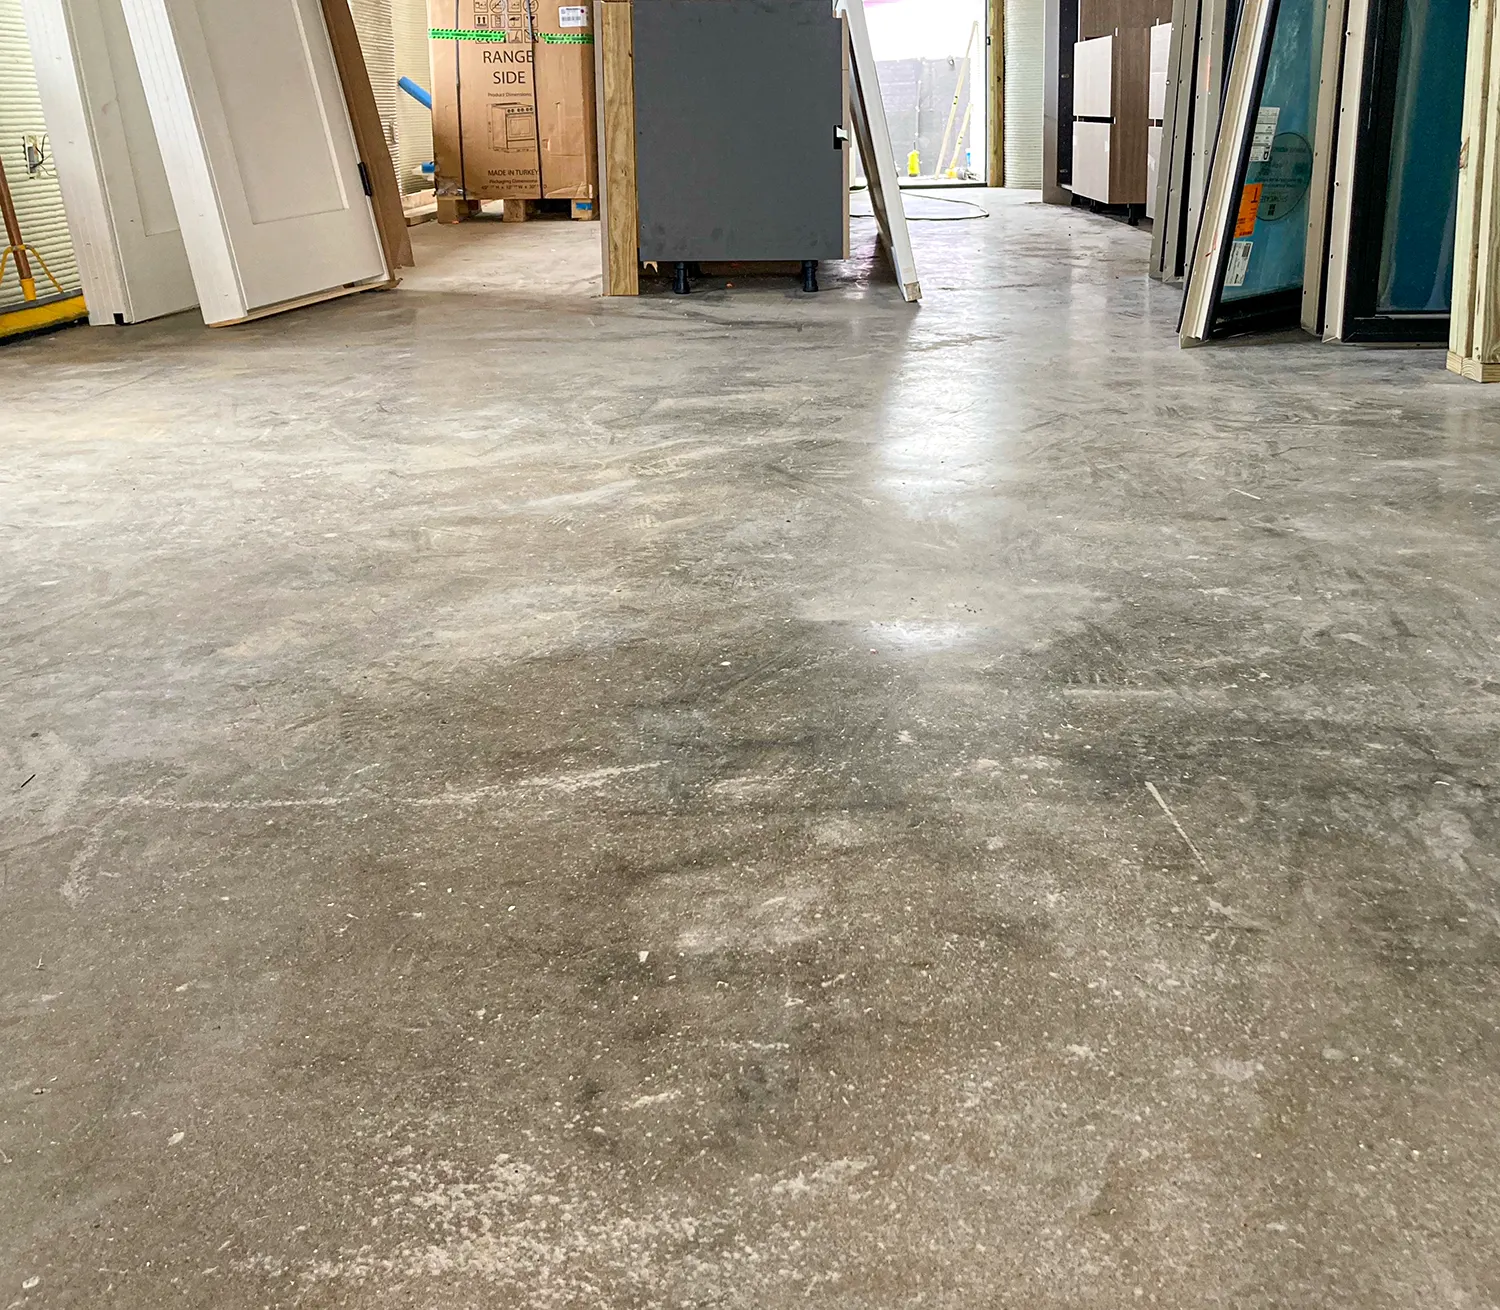 How much Do polished concrete floors cost in renovation projects